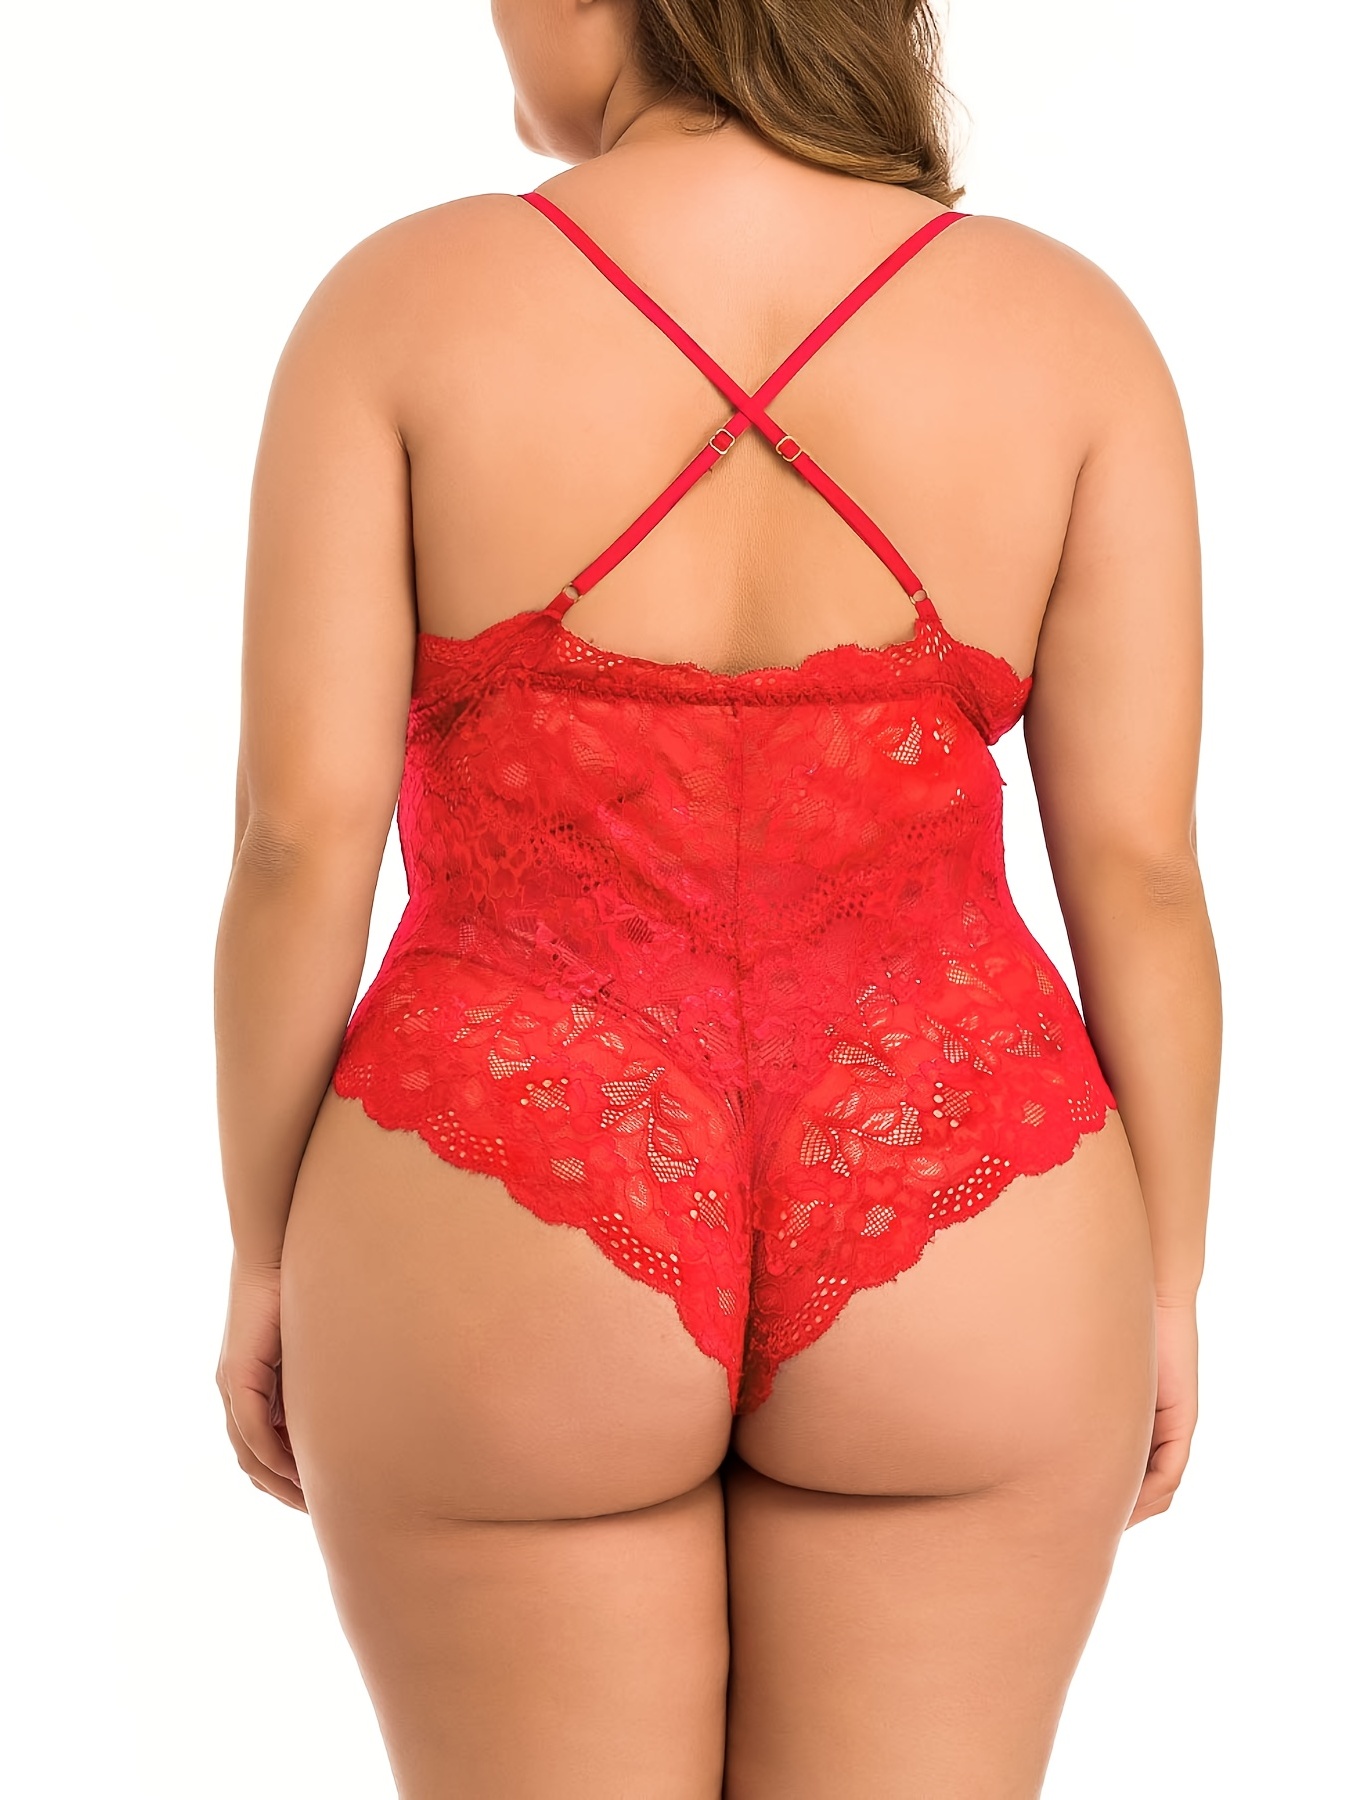 Plus Size Contrast Lace Semi Sheer Sexy Lingerie Bodysuits, Women's Plus  Deep V Neck Slight Stretch Sexy Costumes Teddy Bodysuits